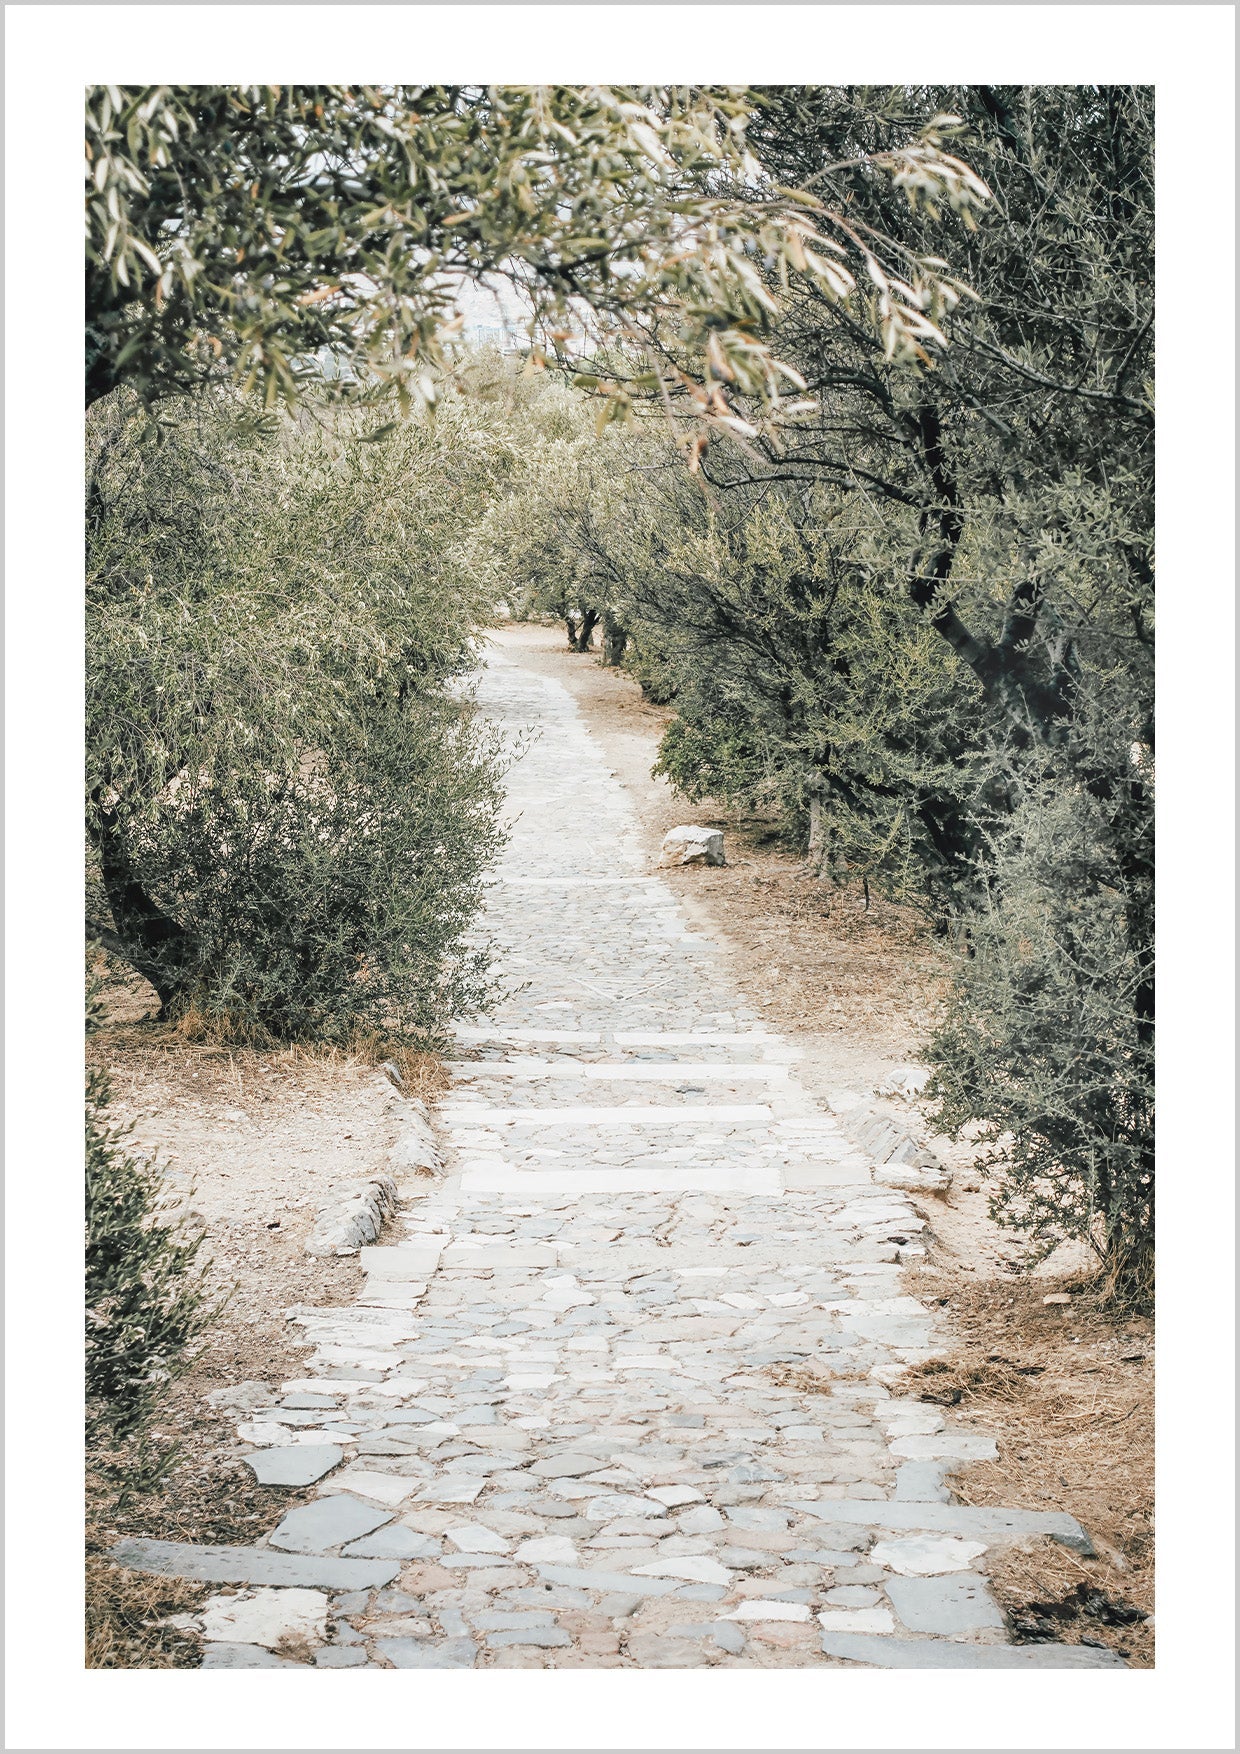 photography of a paved path in a garden with olive trees in Greece.